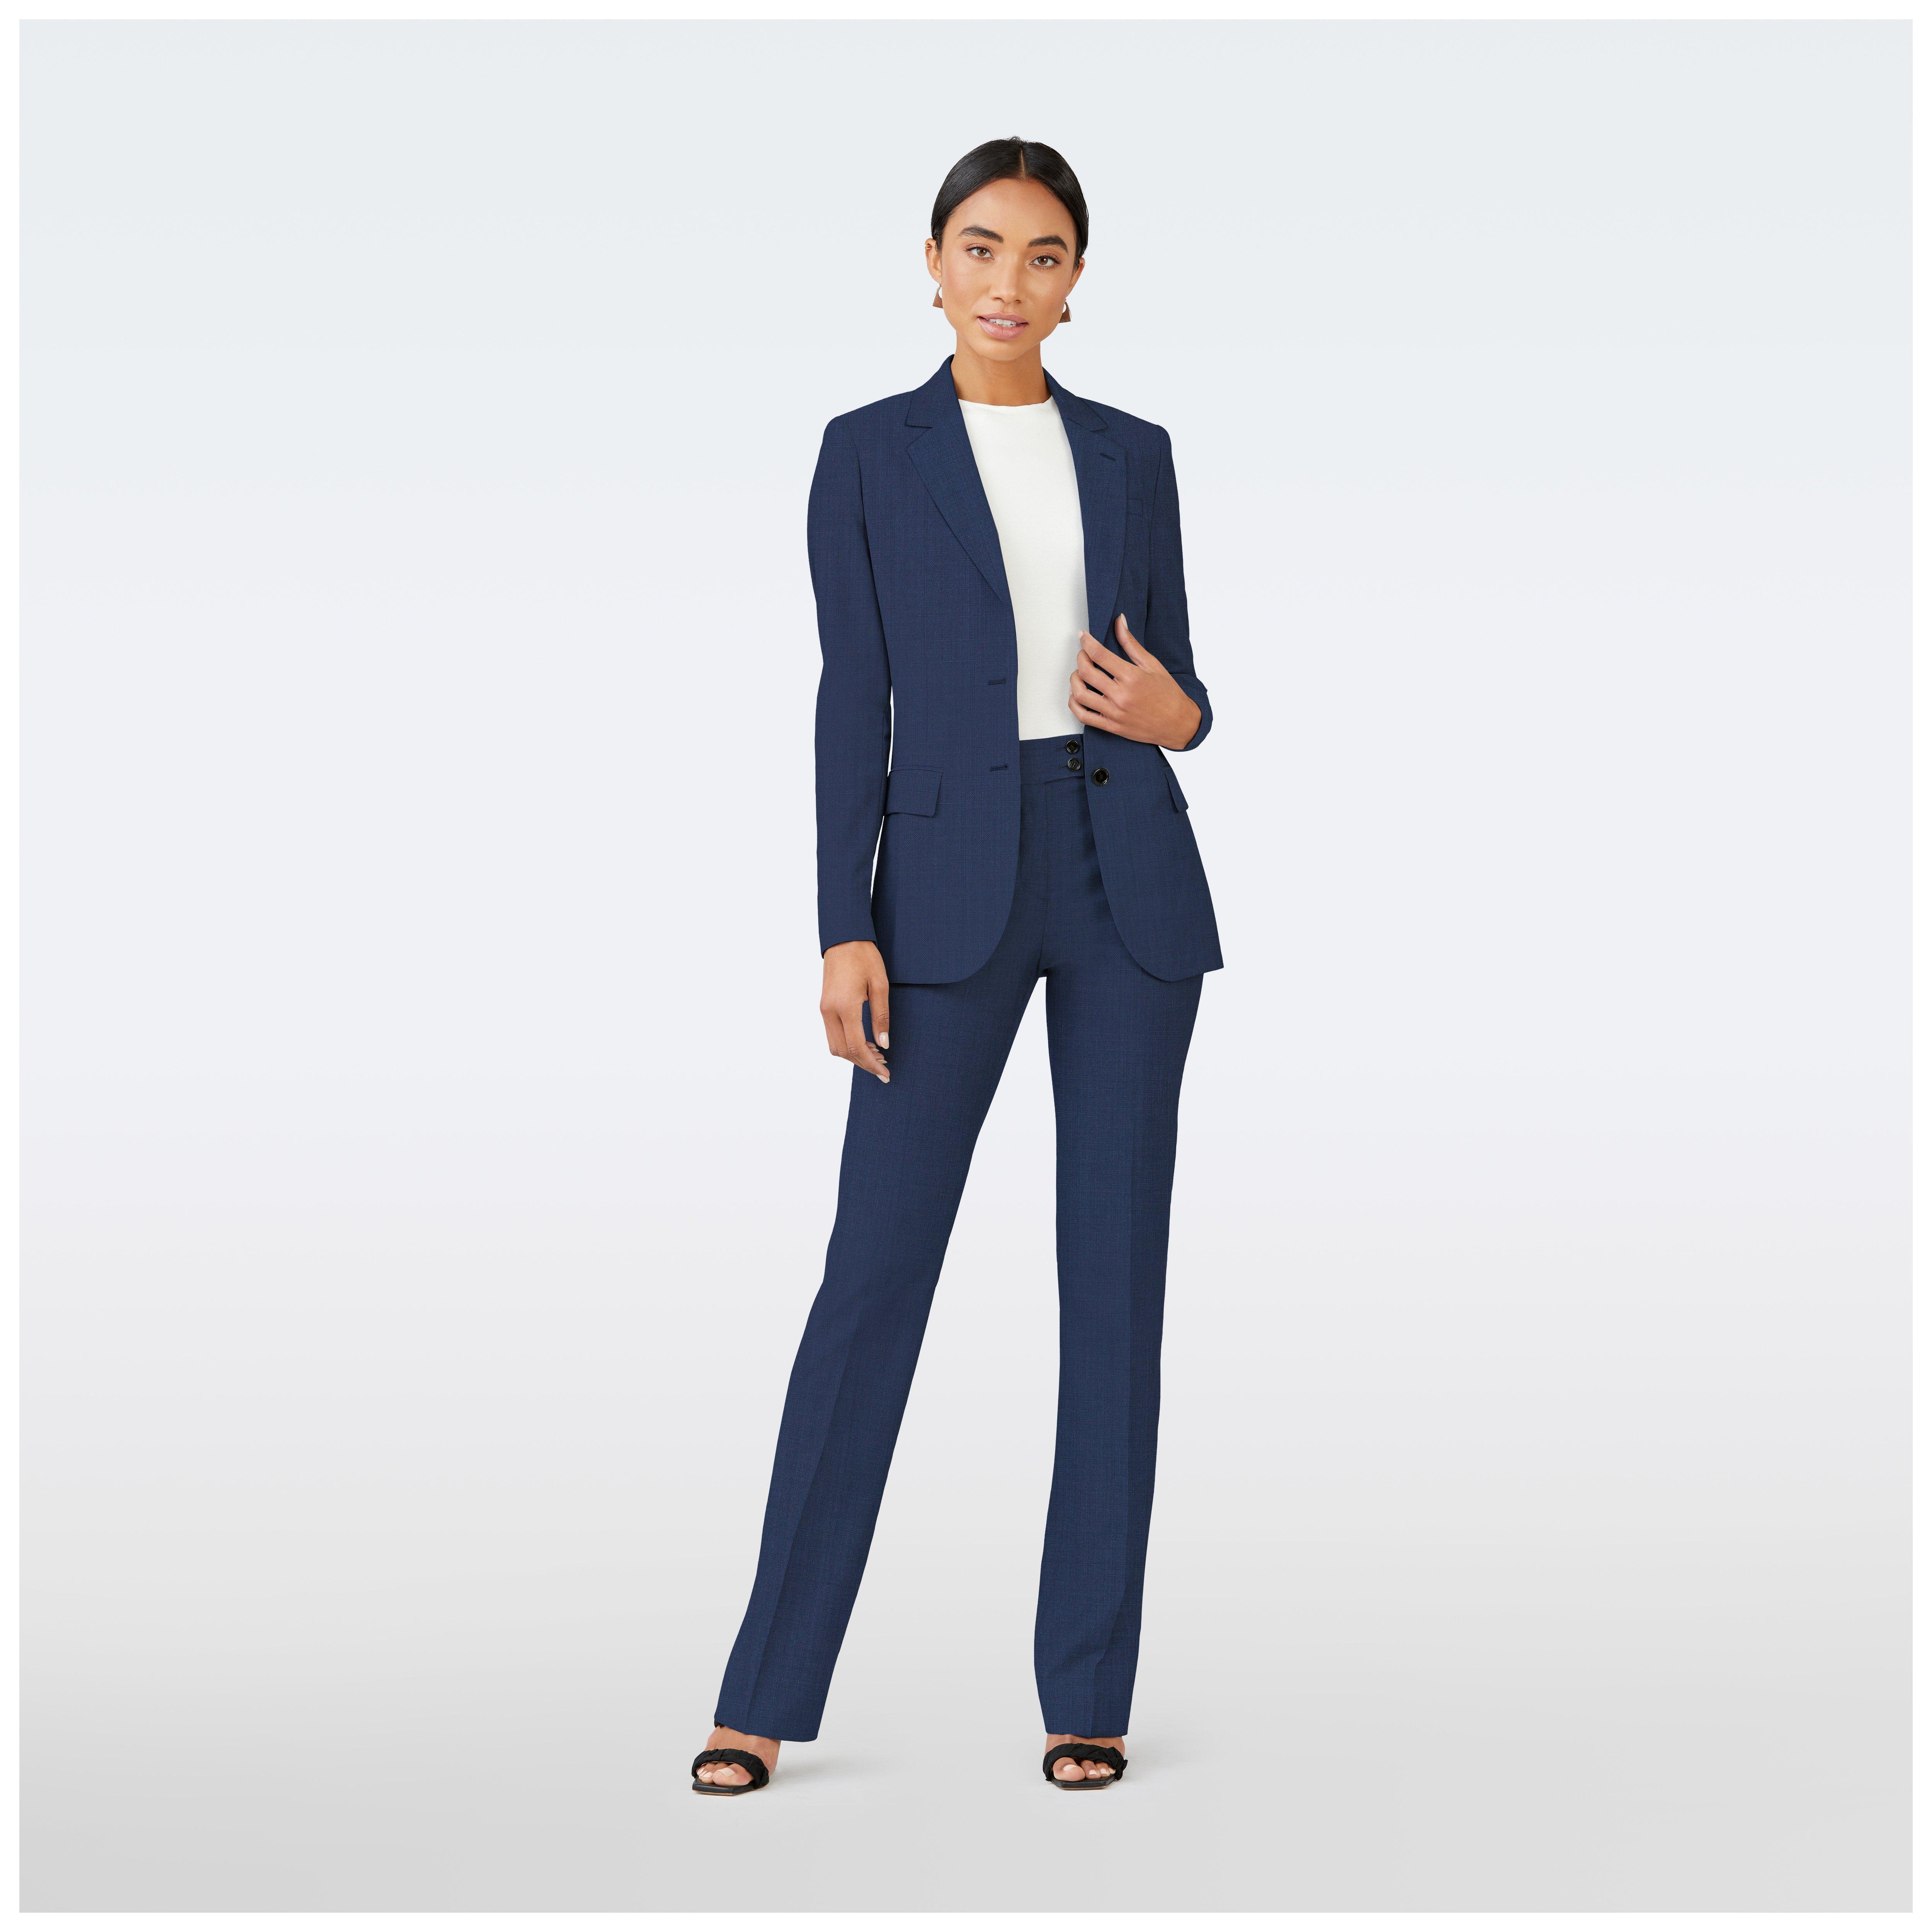 REORIAFEE Casual Outfits for Women Date Night Outfit Women's Long Sleeve  Suit Pants Casual Elegant Business Suit Navy M - Walmart.com